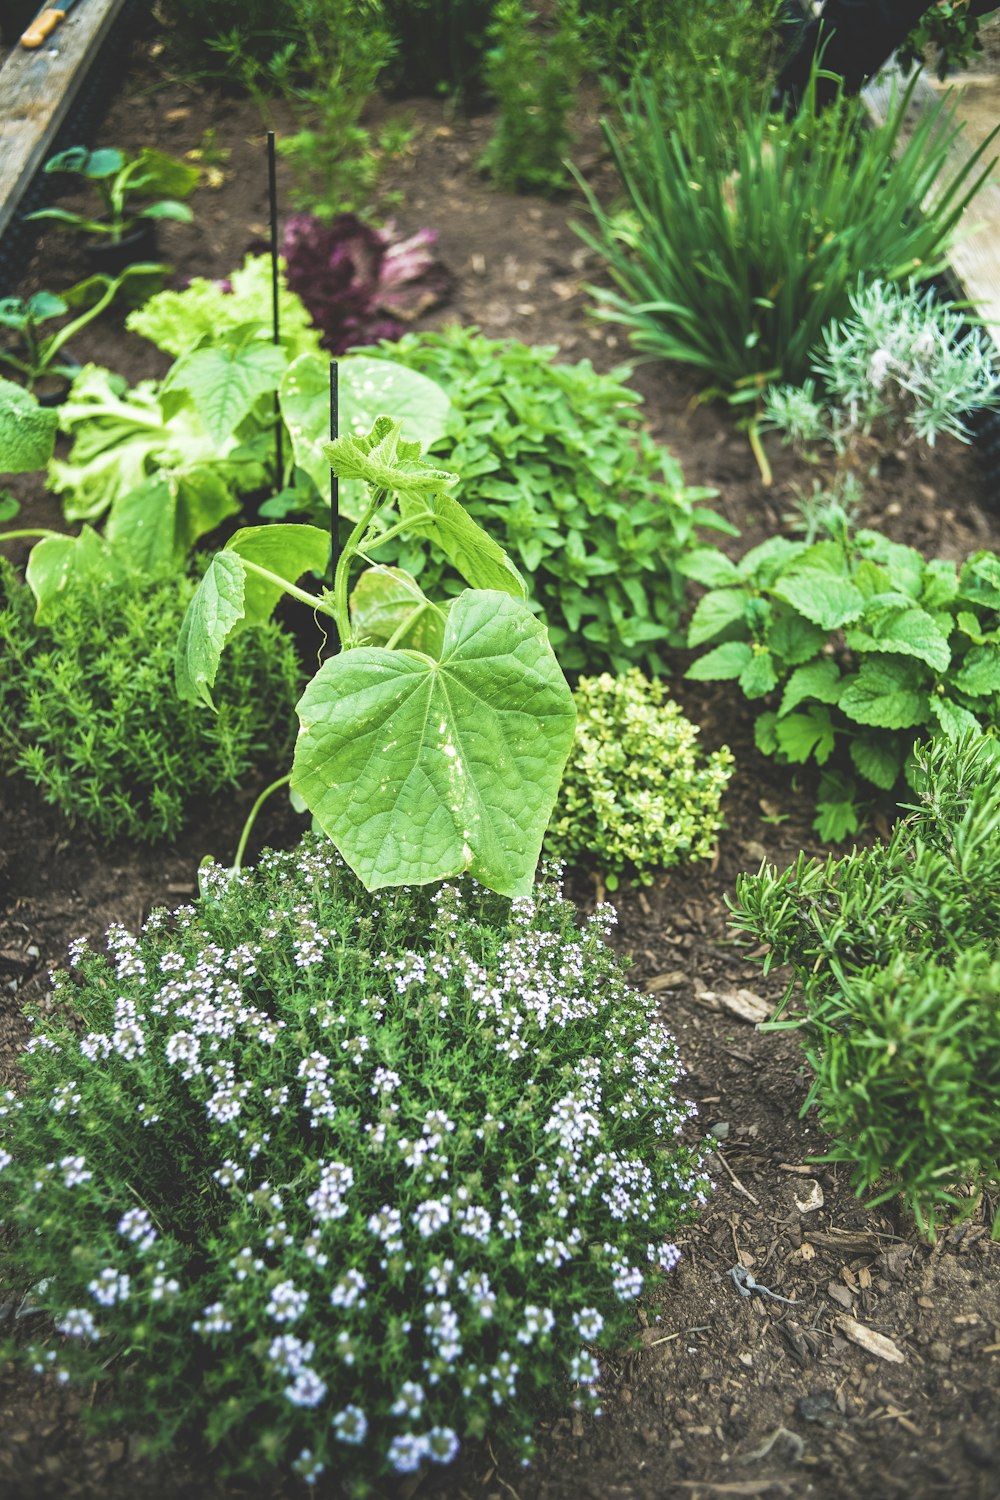 Planting Vegetables and flowers together looks nice and can be beneficial to both!